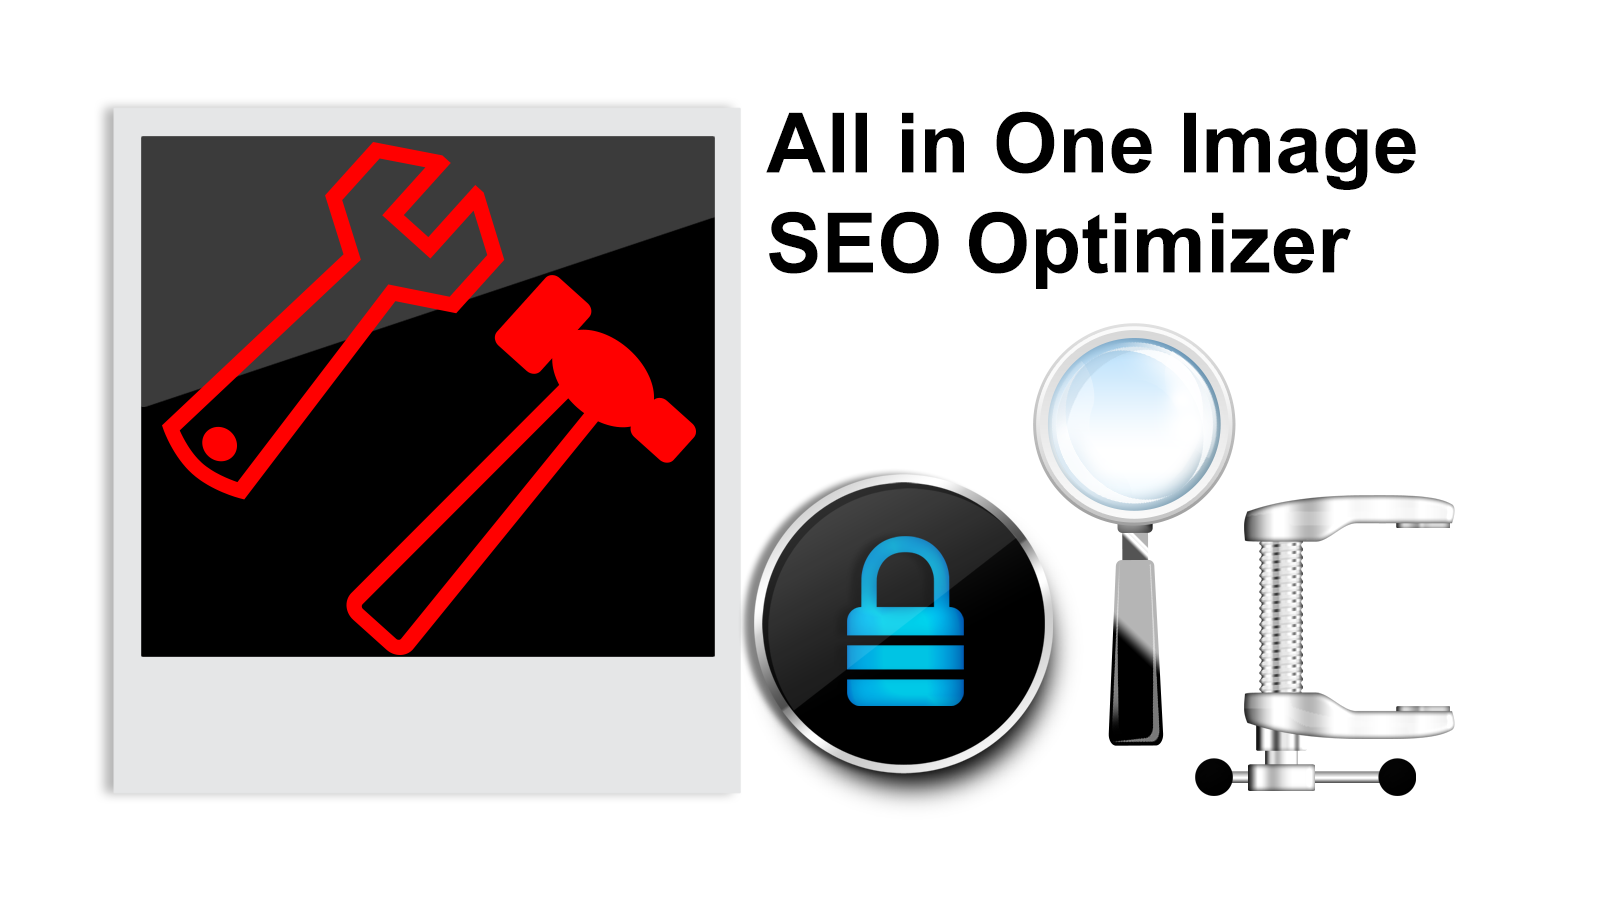 All in One Image SEO Optimizer